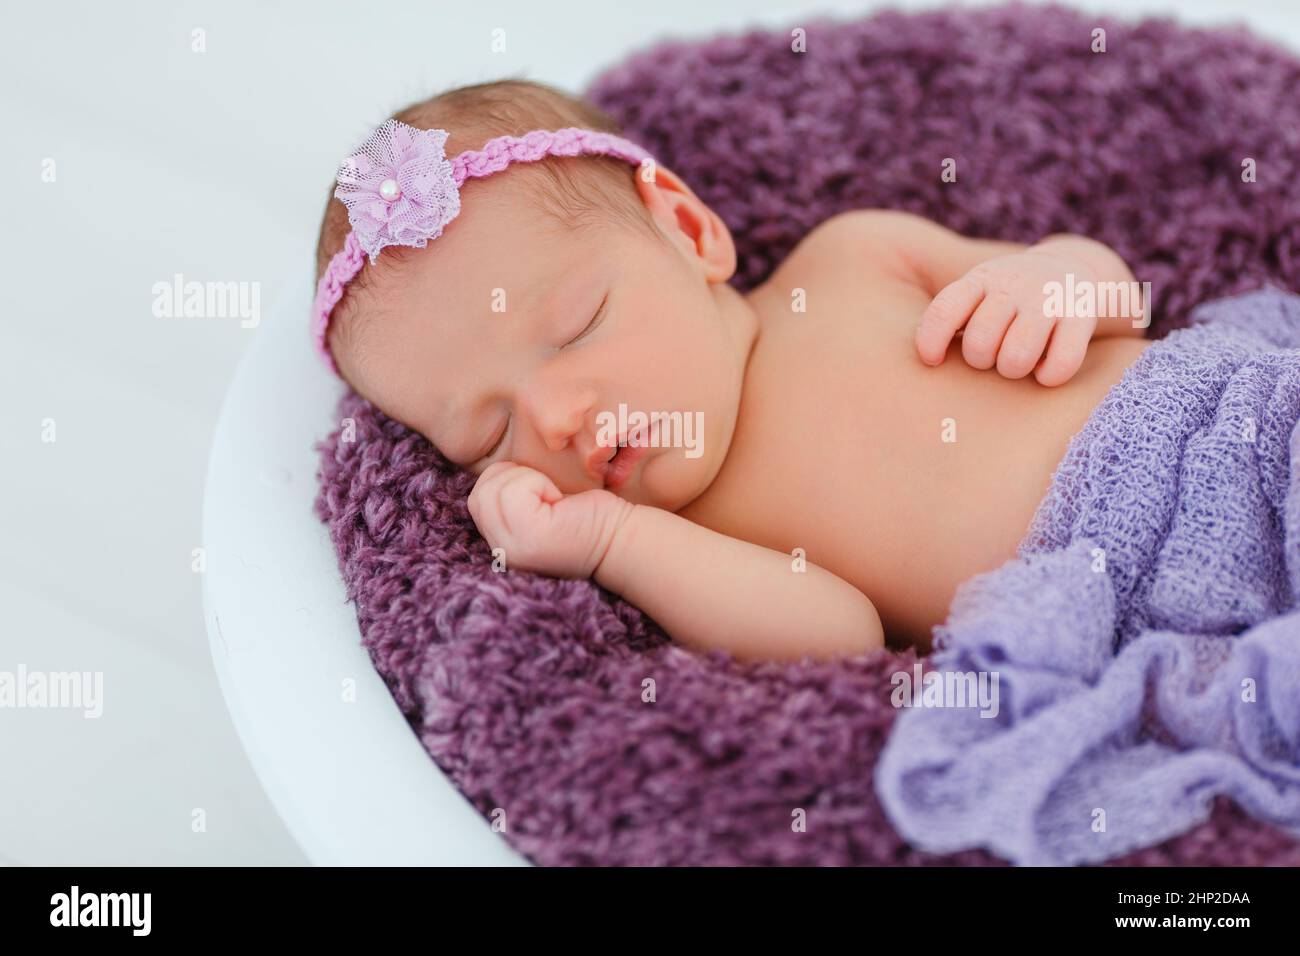 Newborn baby in violet knitted suit sleep in wooden basket. Child resting in cute pose. Tiny girl with tender headband on head. Creative infant photog Stock Photo